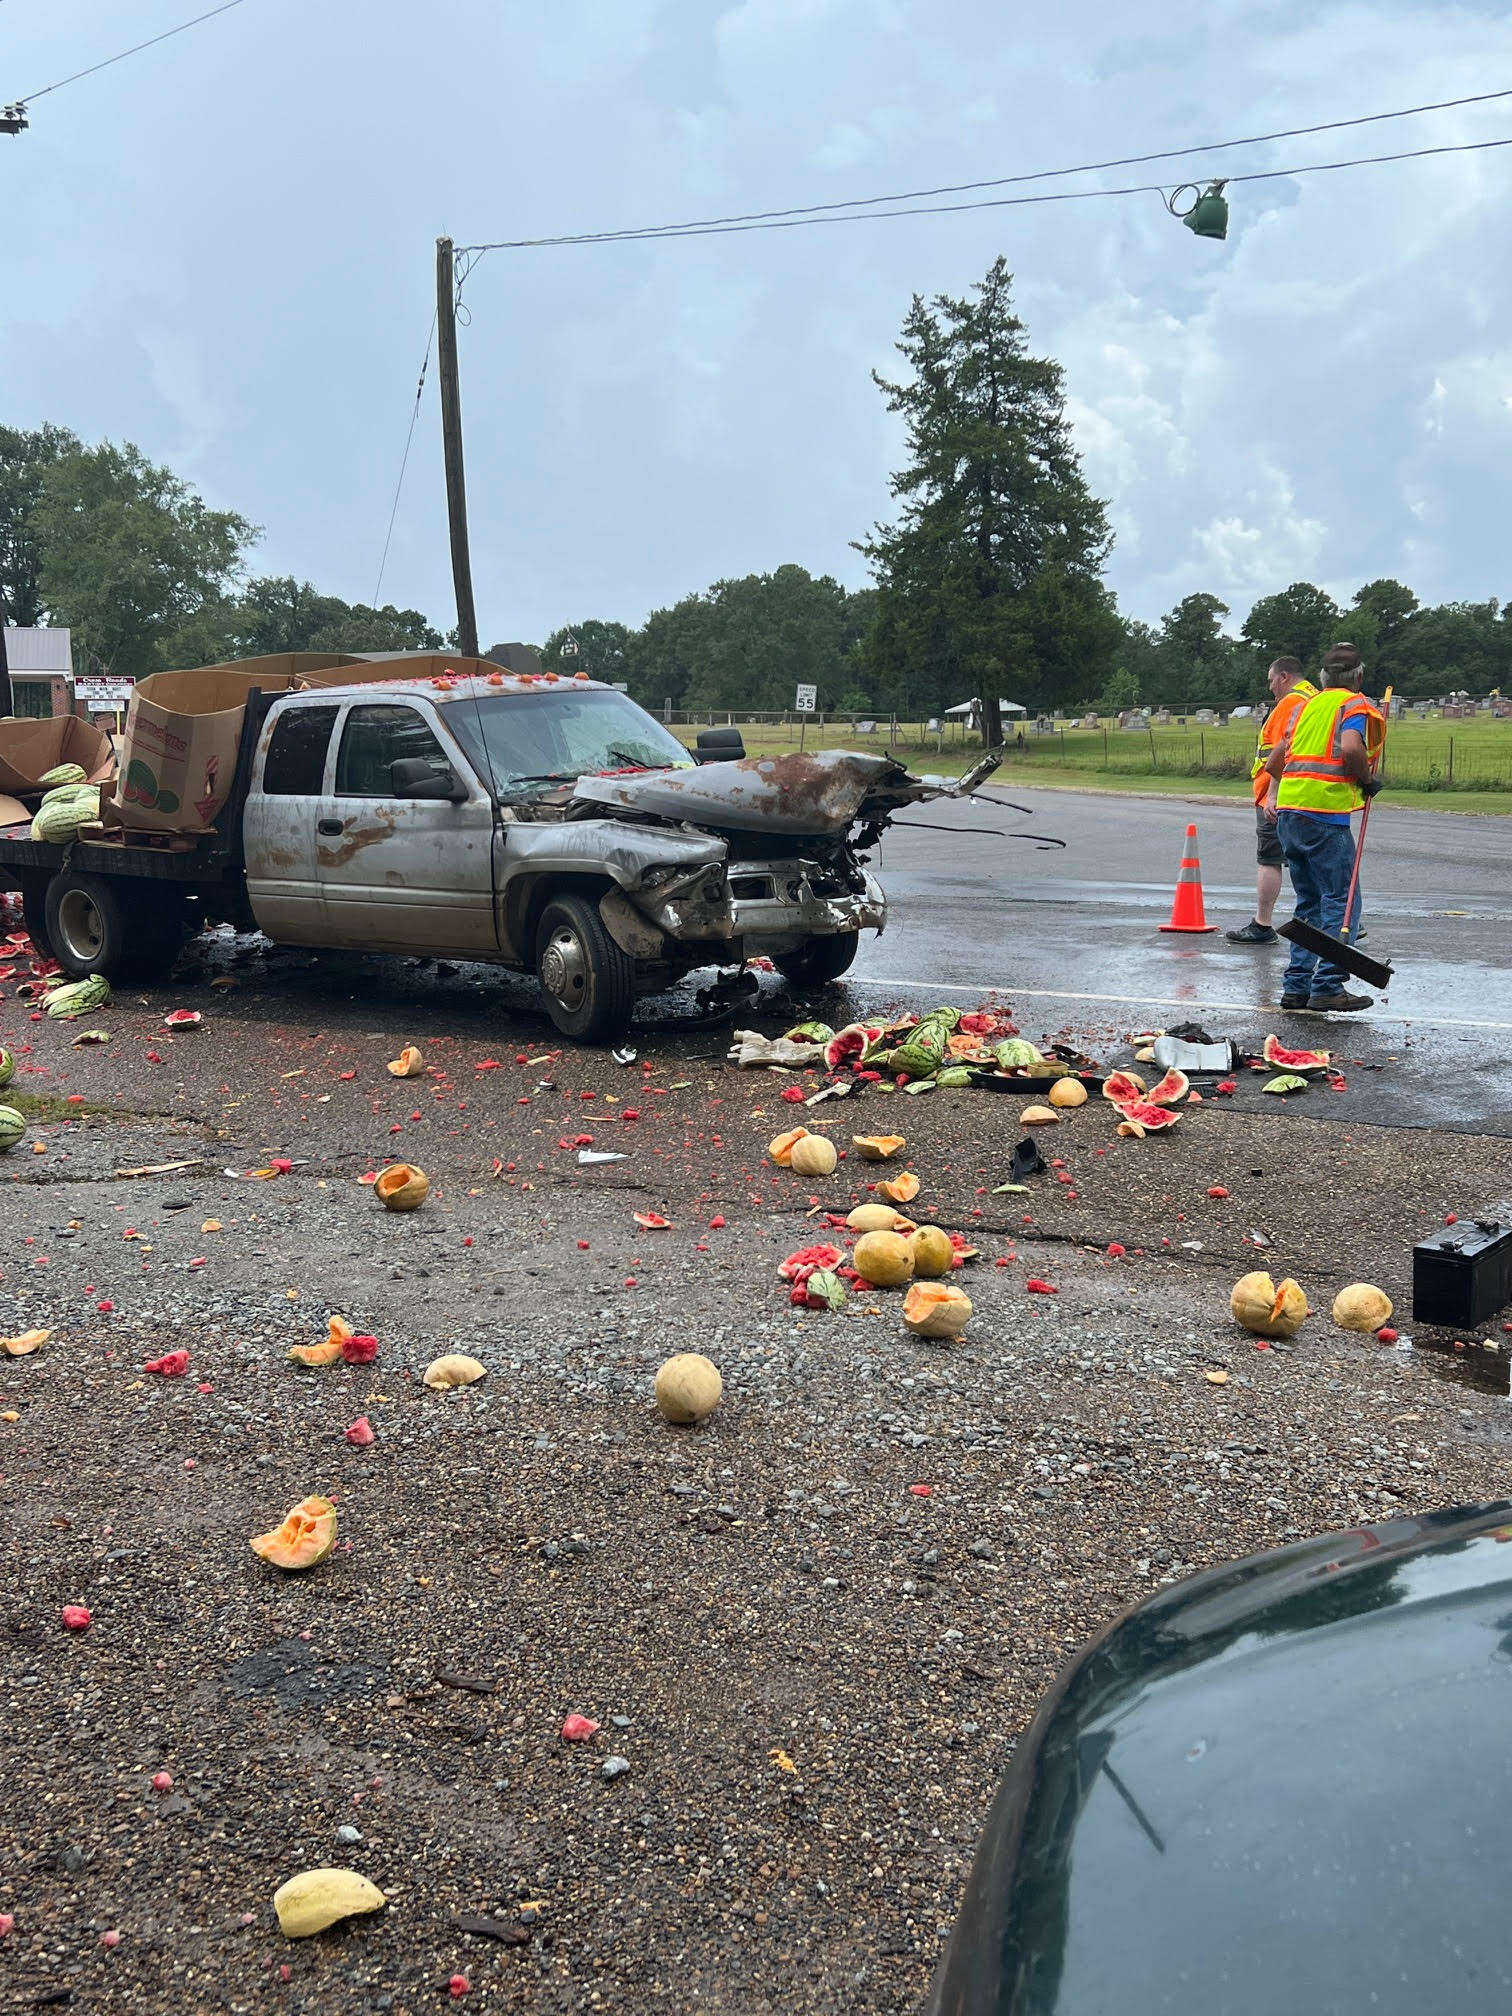 A produce truck after accident that crushed melons.